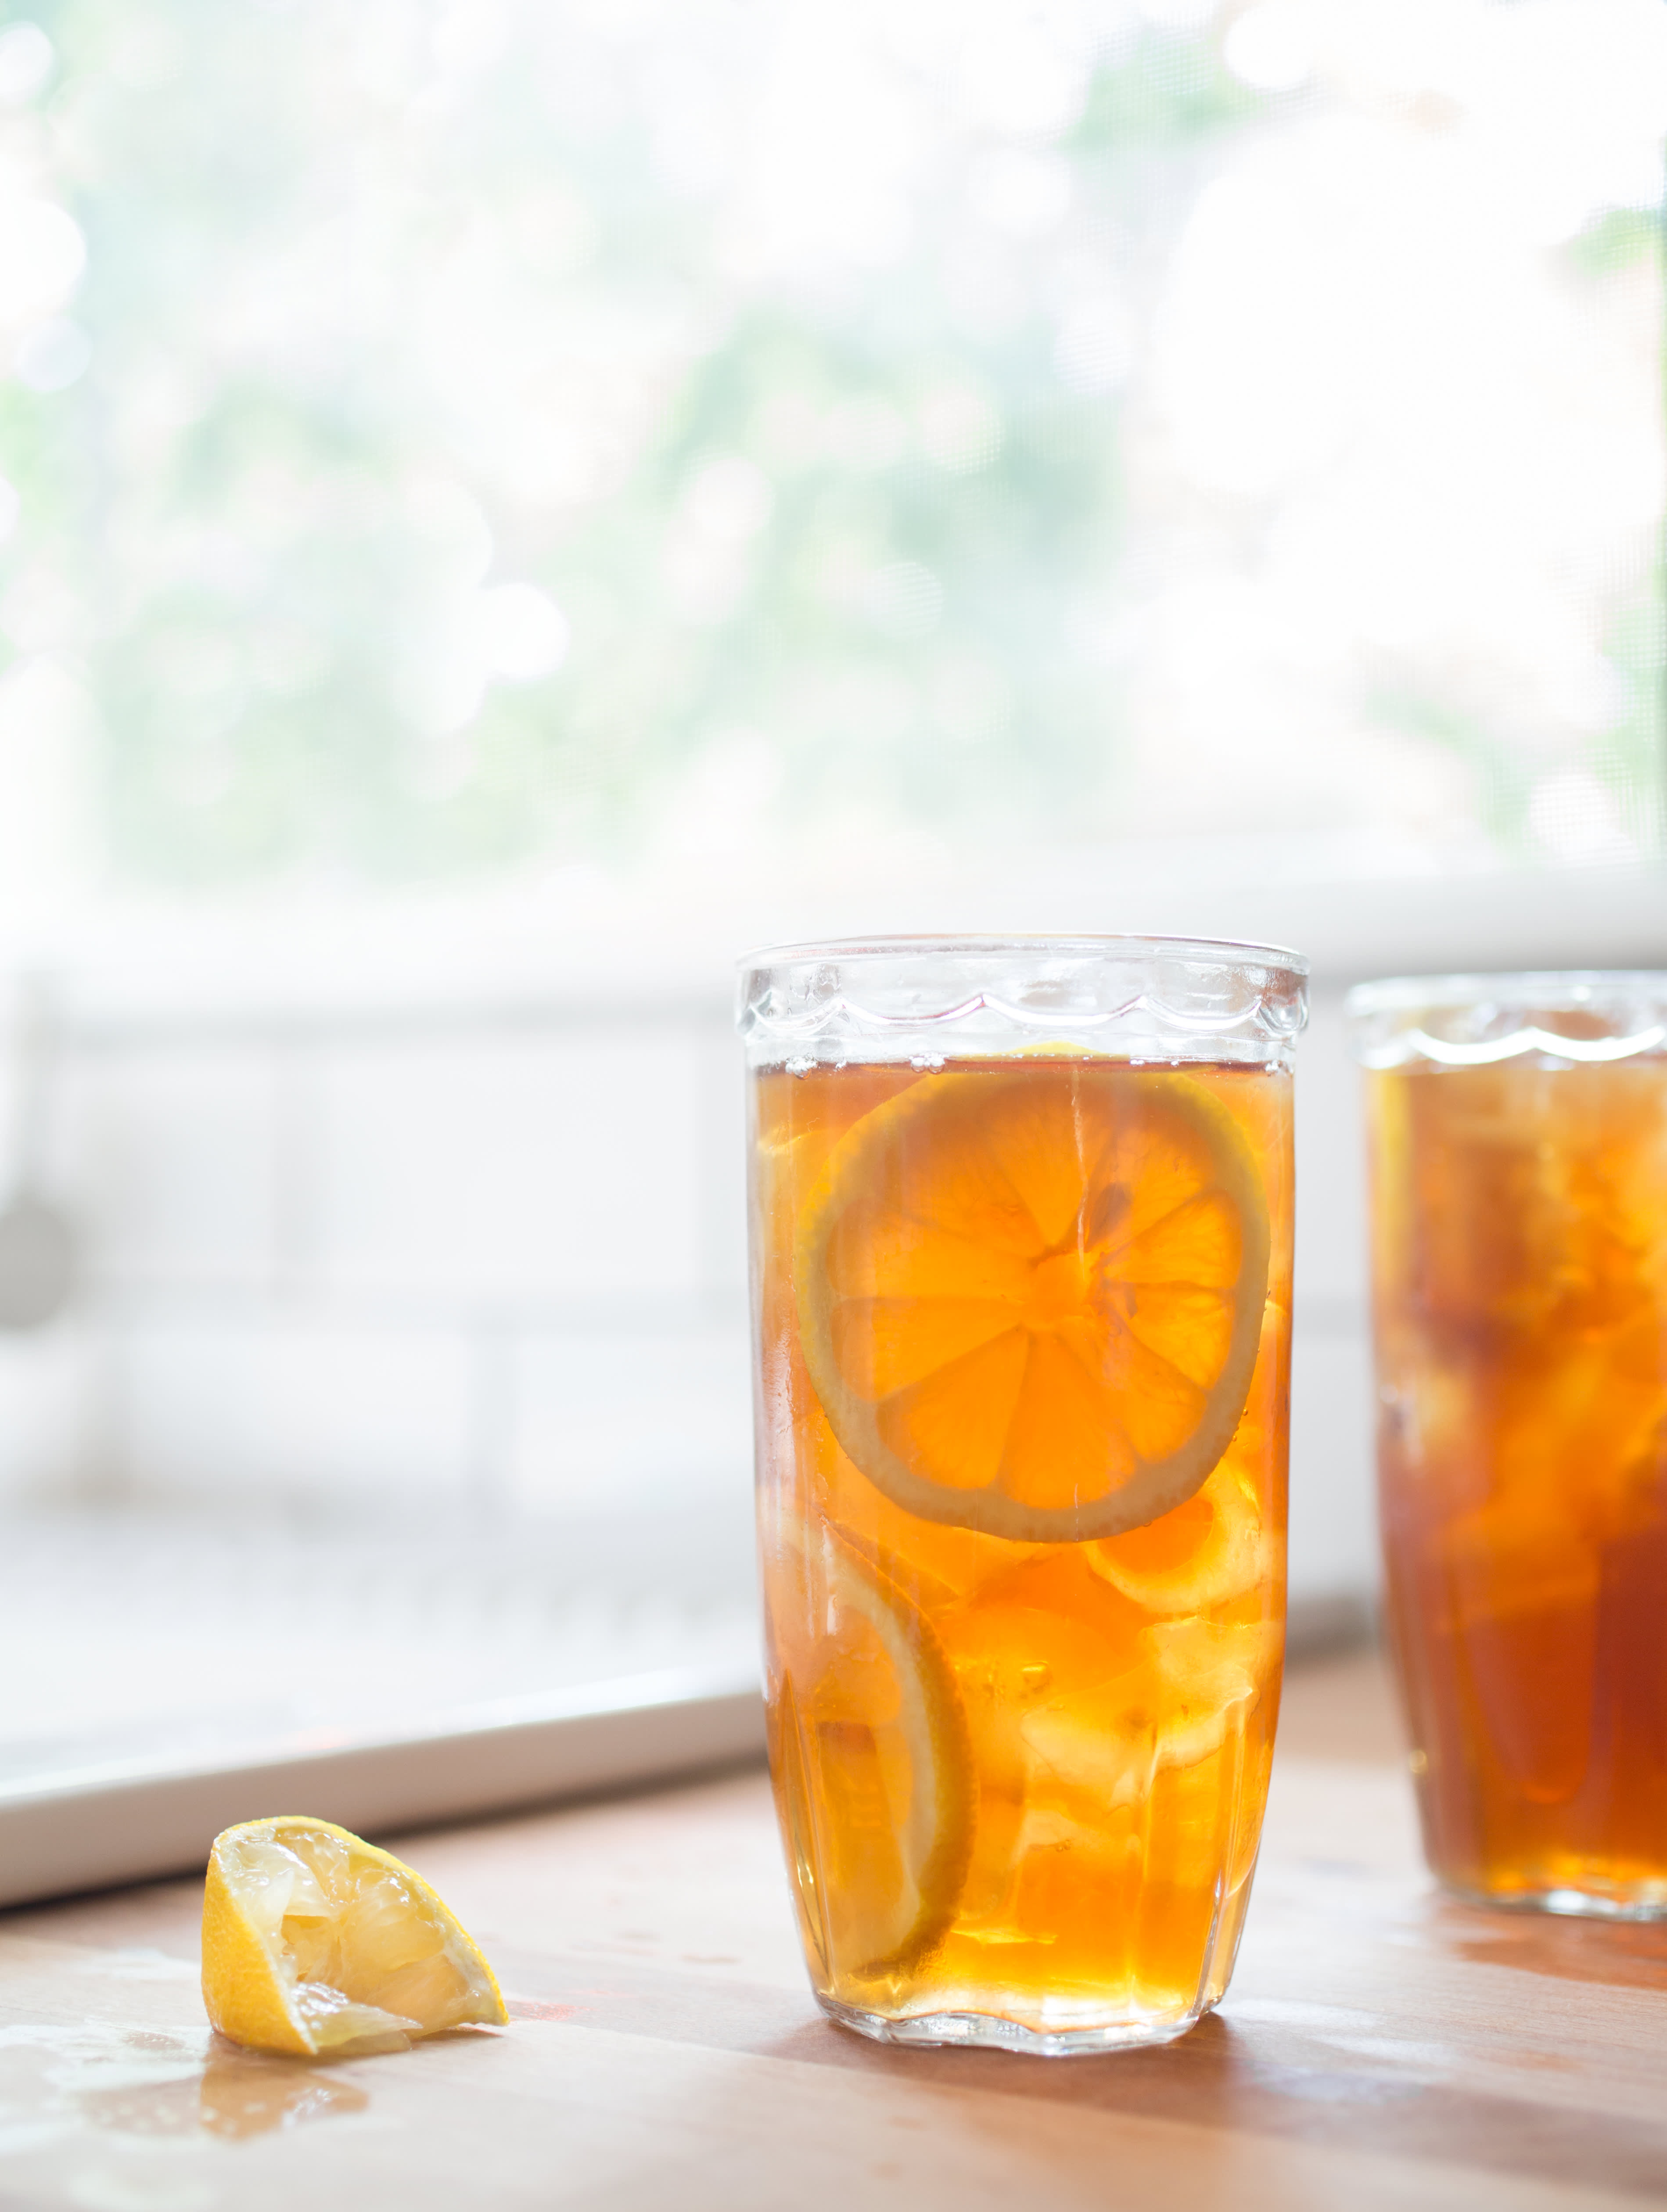 How to make homemade iced tea (sun-brewed or boiled!) - Cucicucicoo